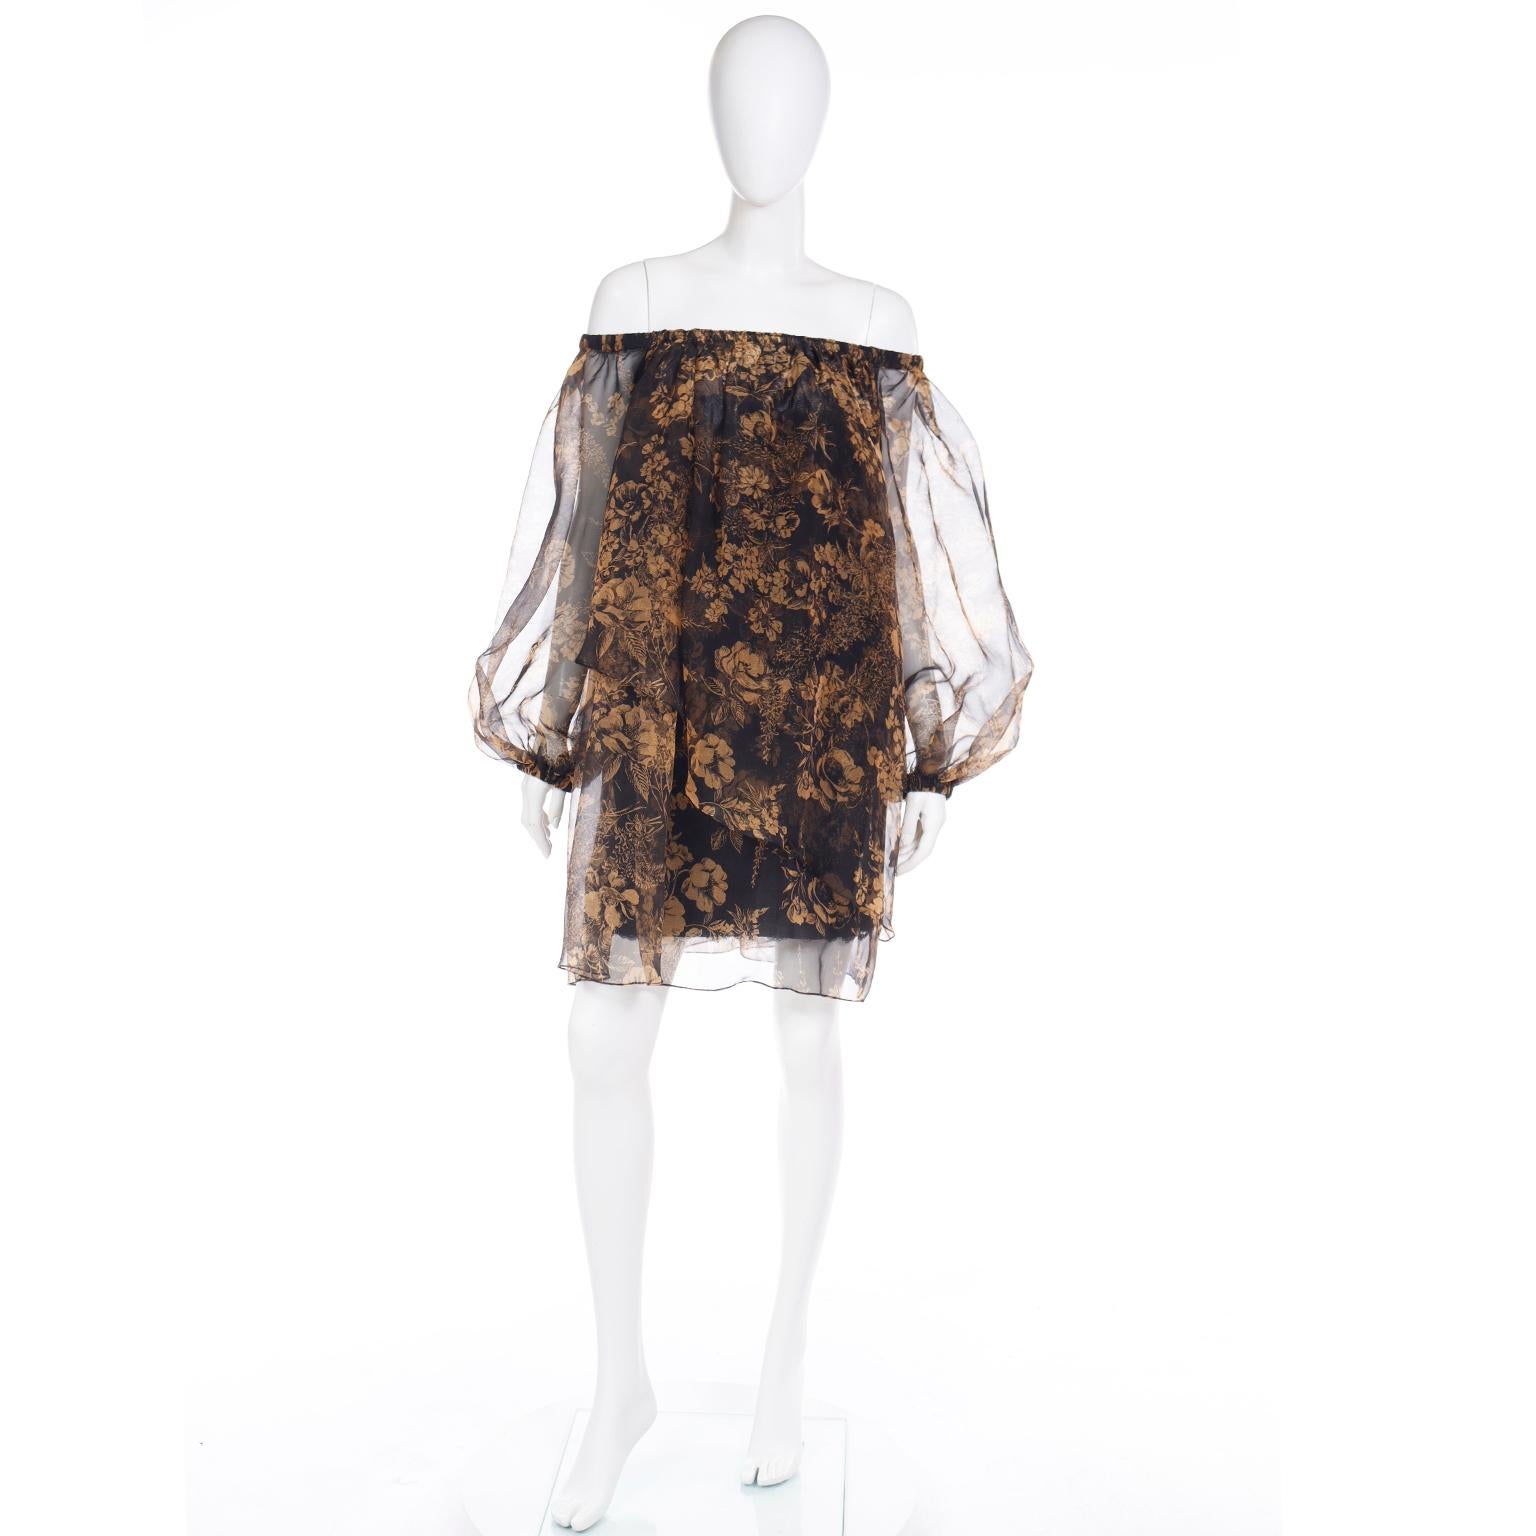 1990 Yves Saint Laurent Black and Gold Chiffon Dress With Sheer Balloon Sleeves In Excellent Condition For Sale In Portland, OR